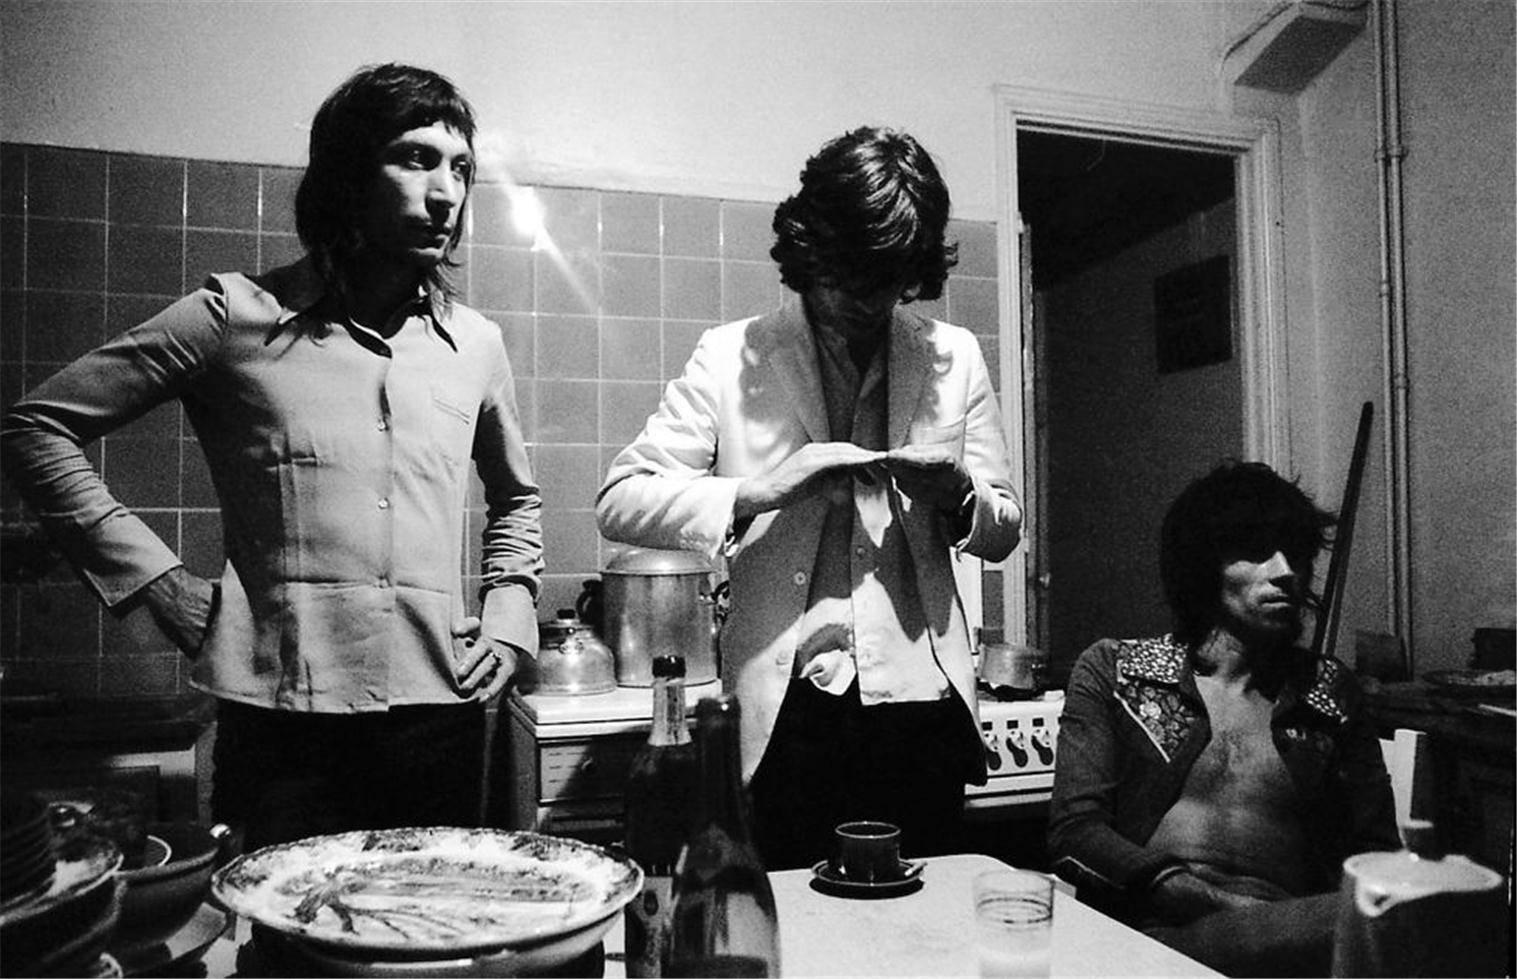 Michael Cooper (b.1941) Black and White Photograph - Charlie Watts, Mick Jagger, Keith Richards